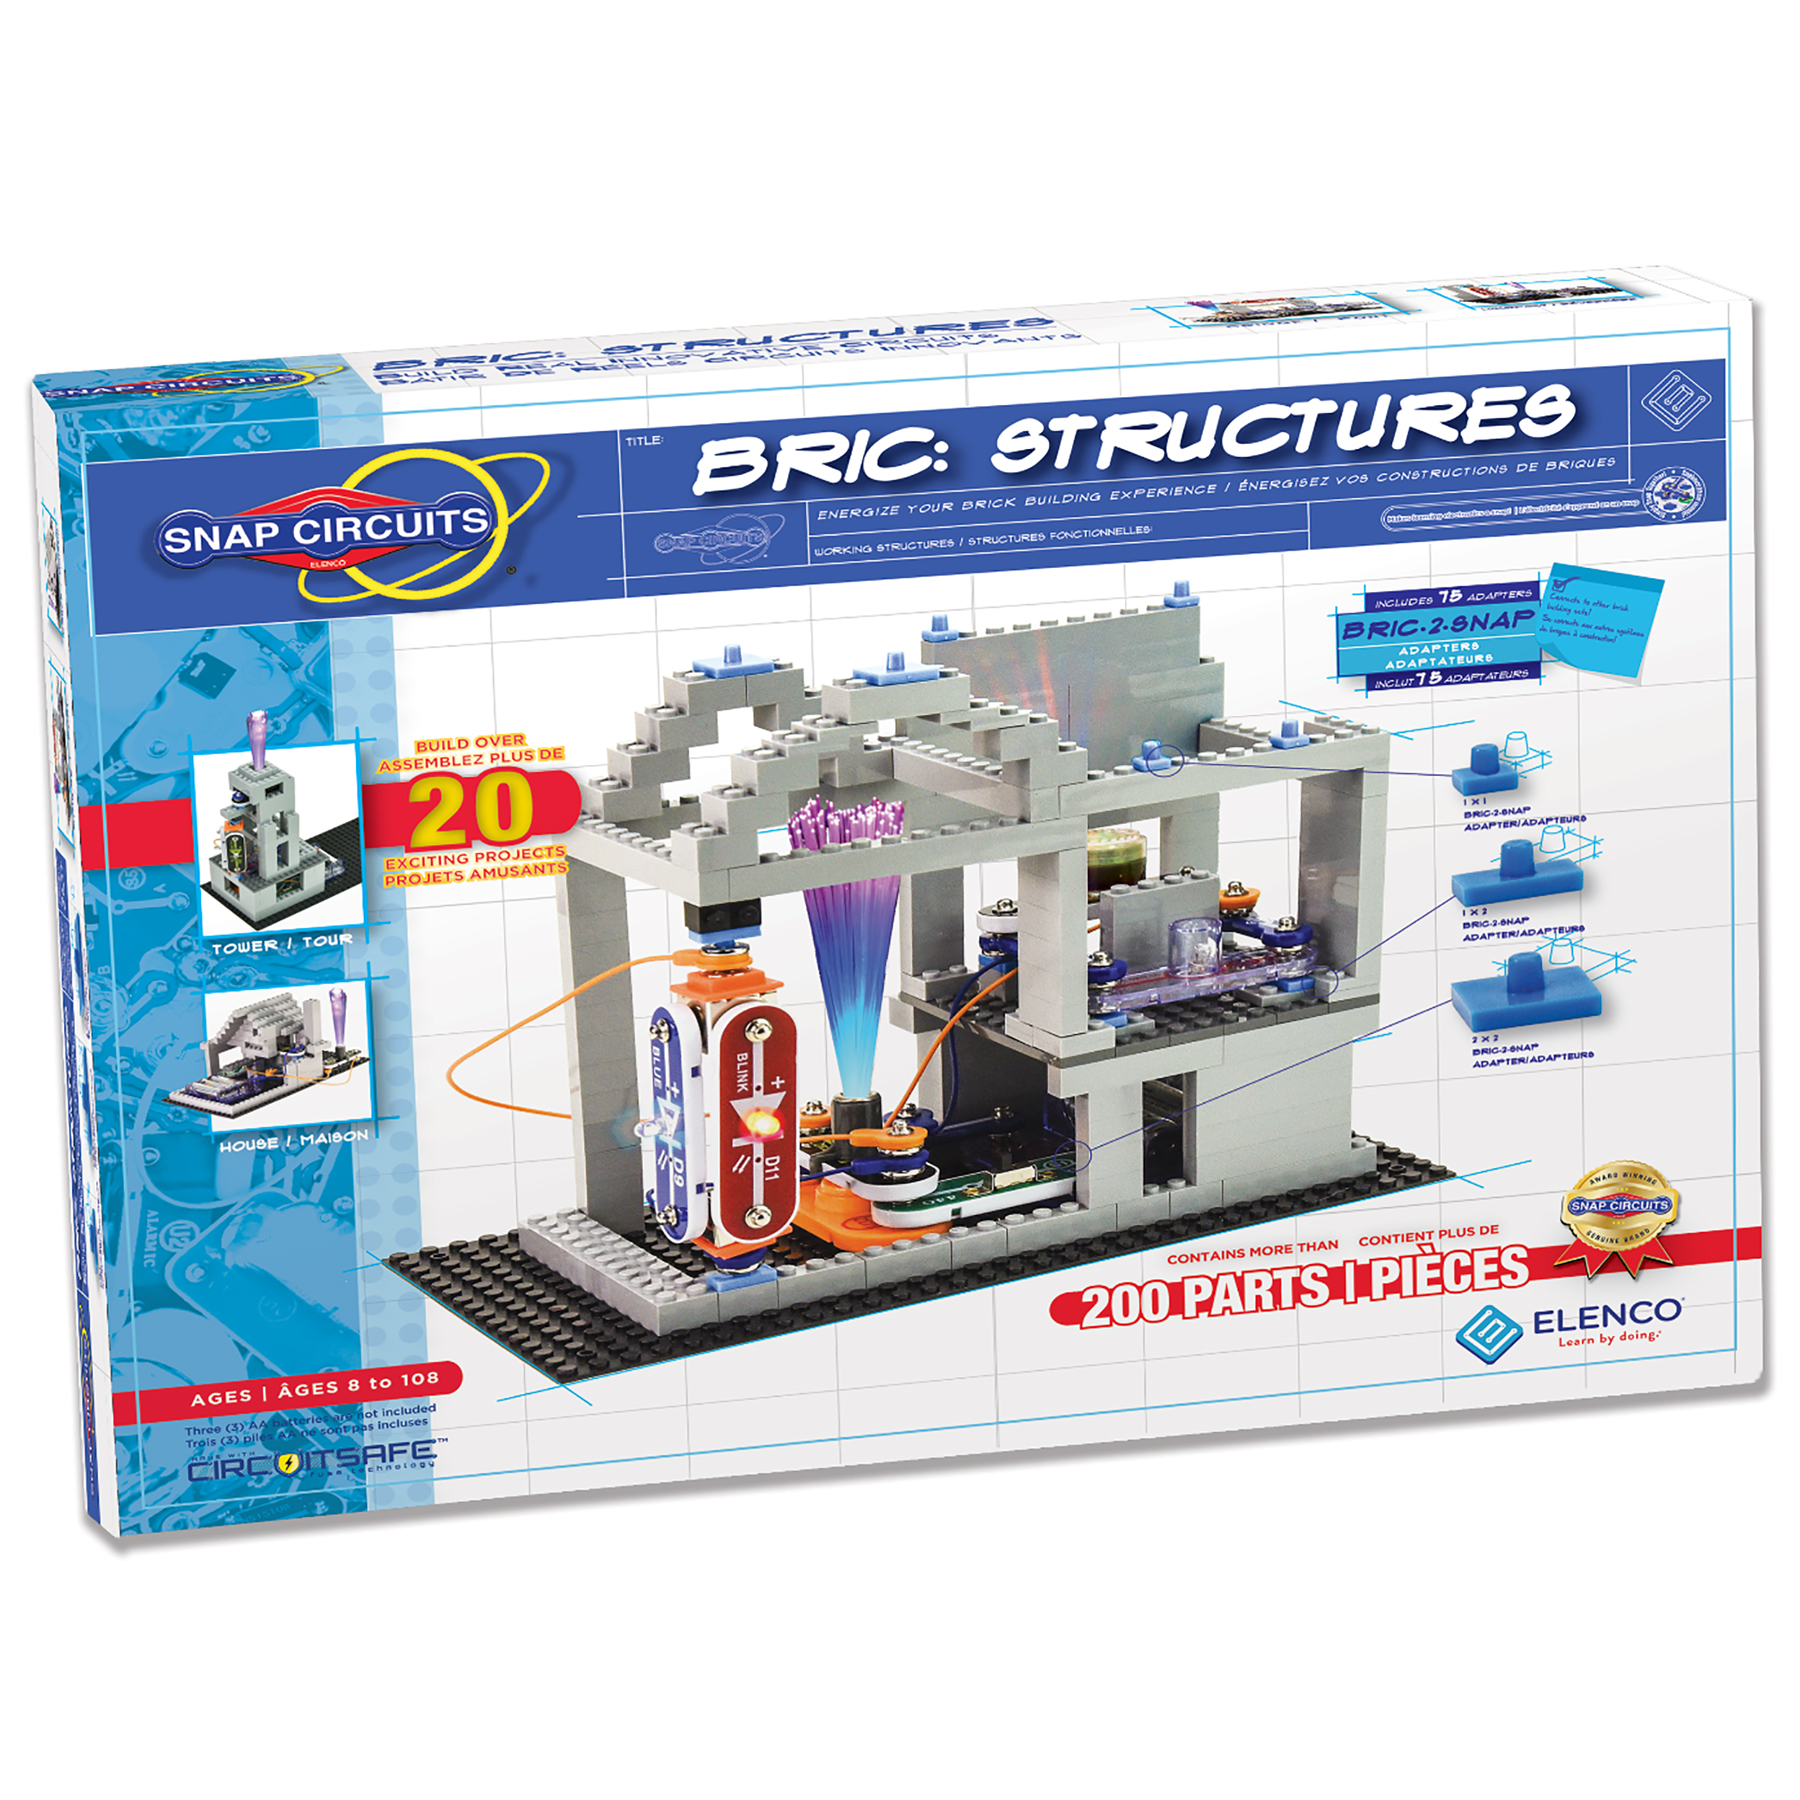 Elenco Snap Circuits Bric, Structures image number null